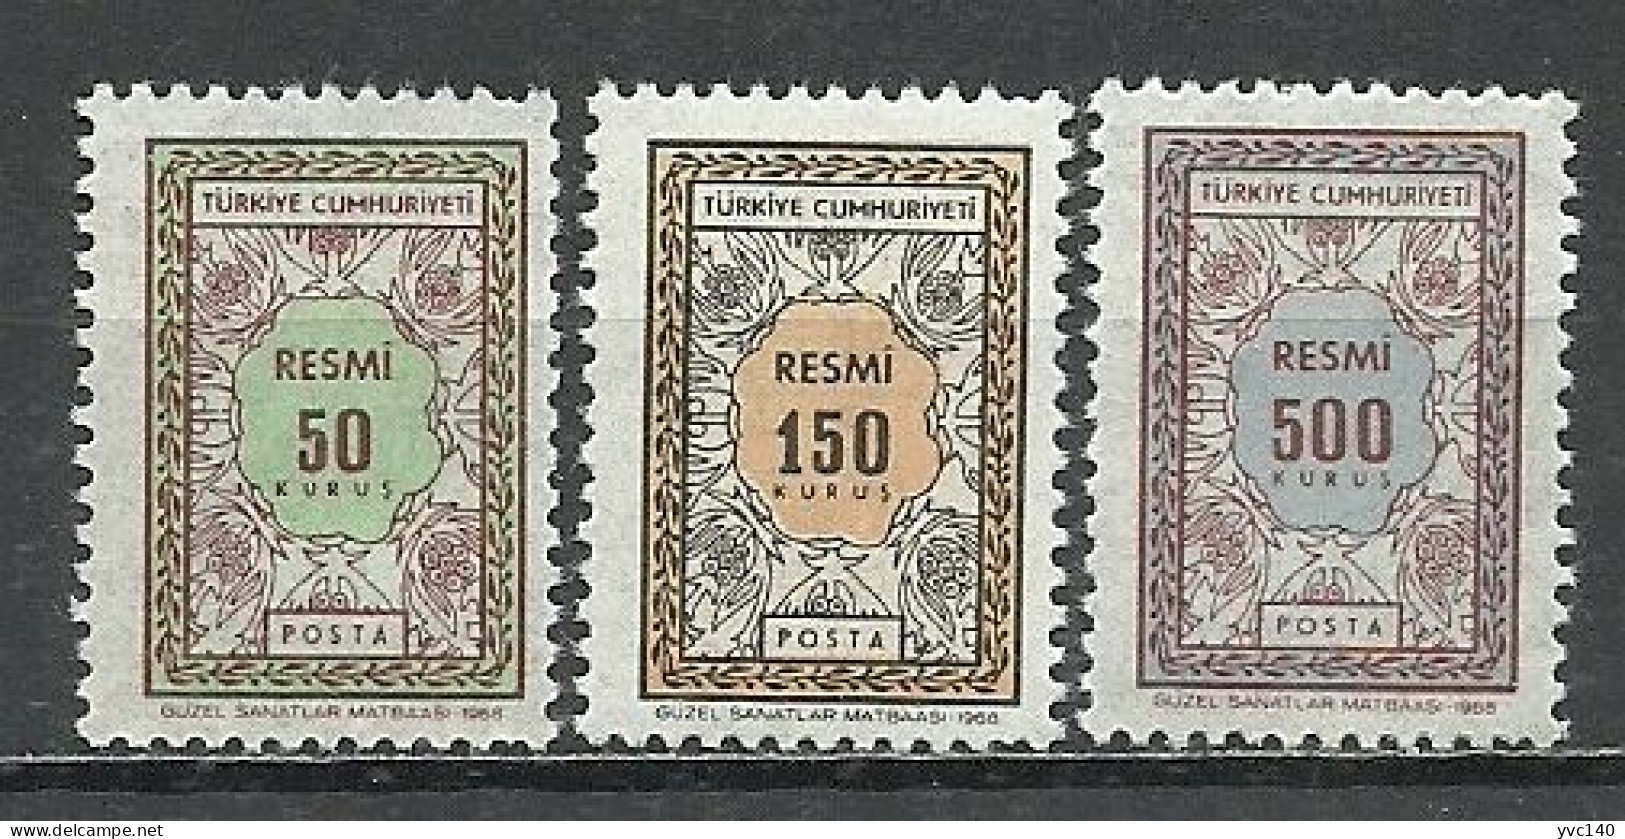 Turkey; 1968 Official Stamps (Complete Set) - Official Stamps